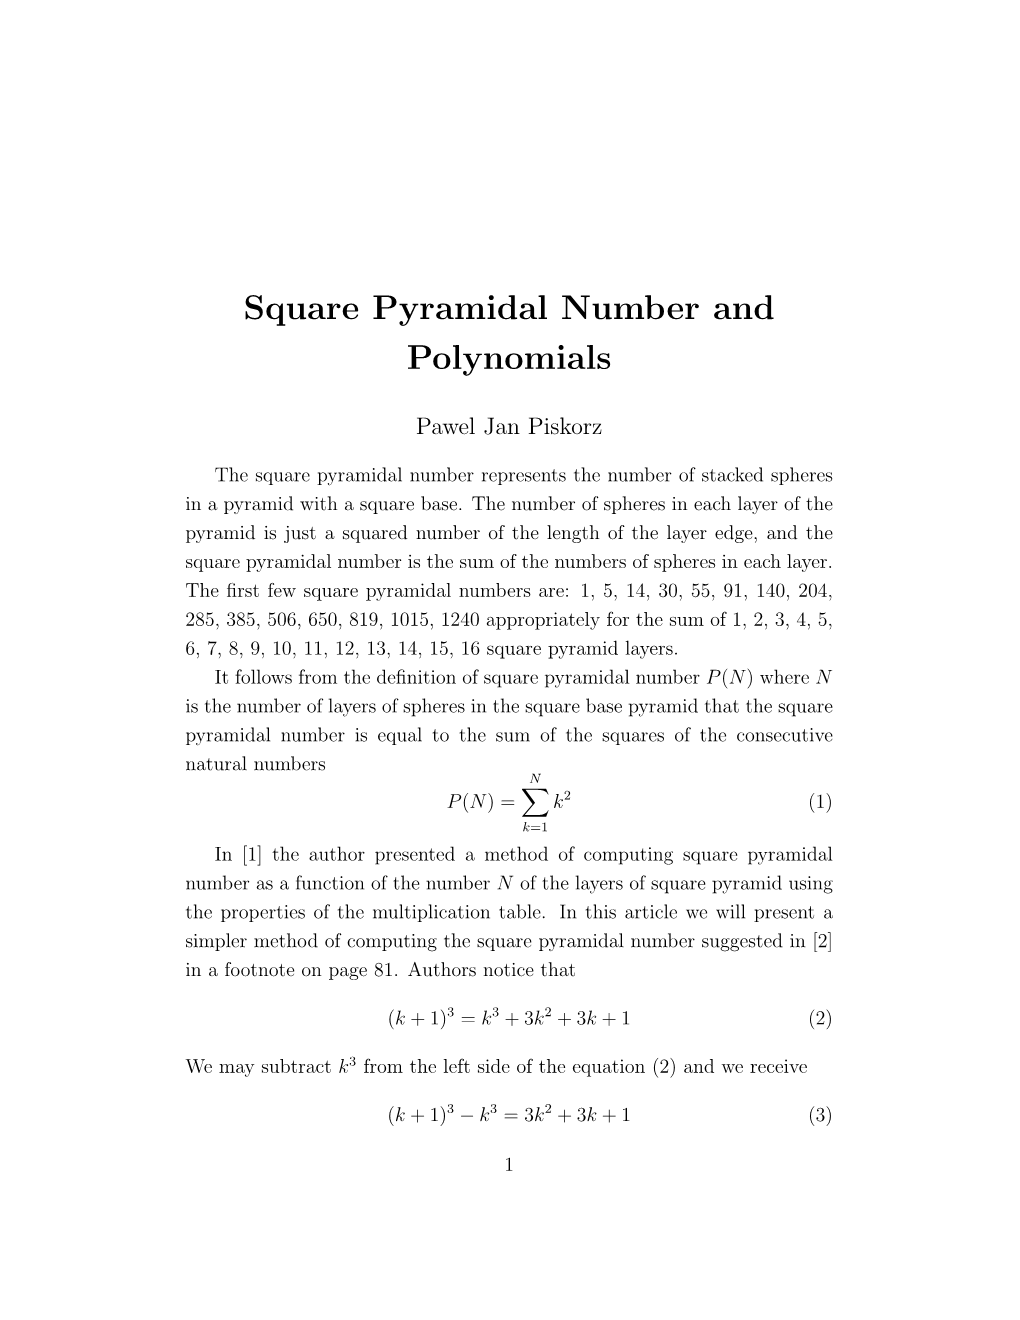 Square Pyramidal Number and Polynomials